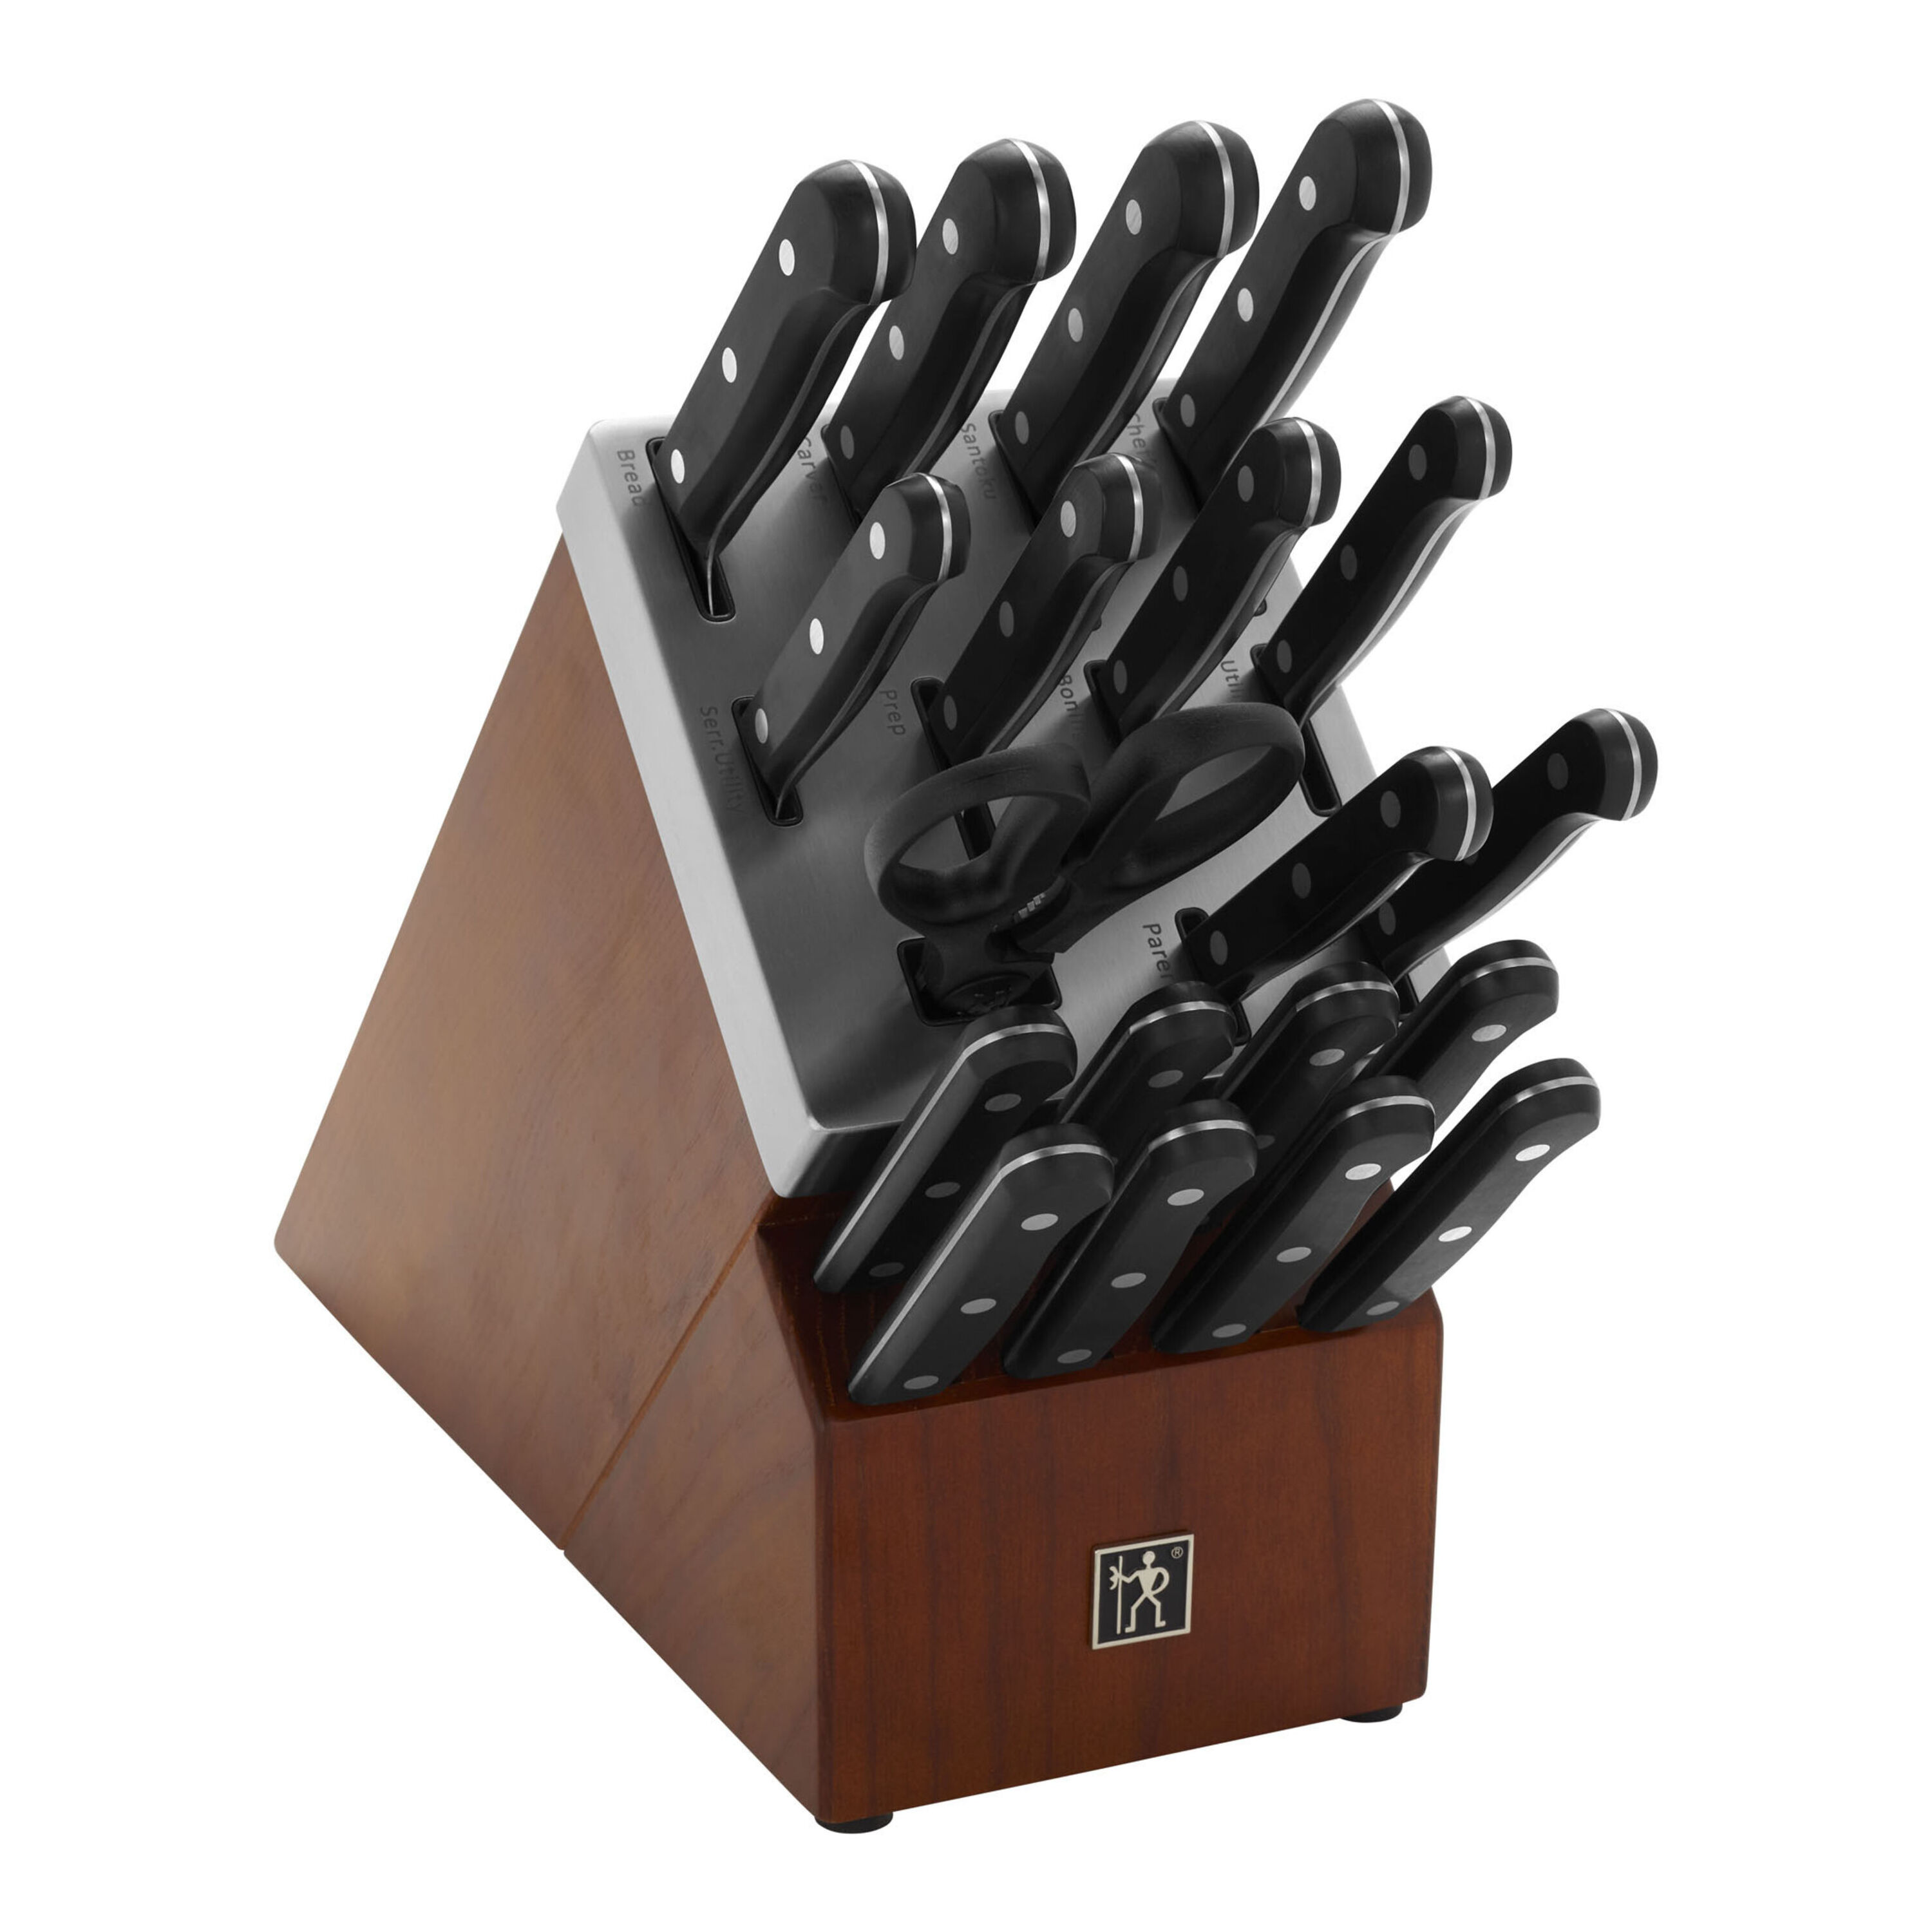 ZWILLING J.A. HENCKELS Knife Block Set, Forged Stainless Steel - 20 Piece  for sale online